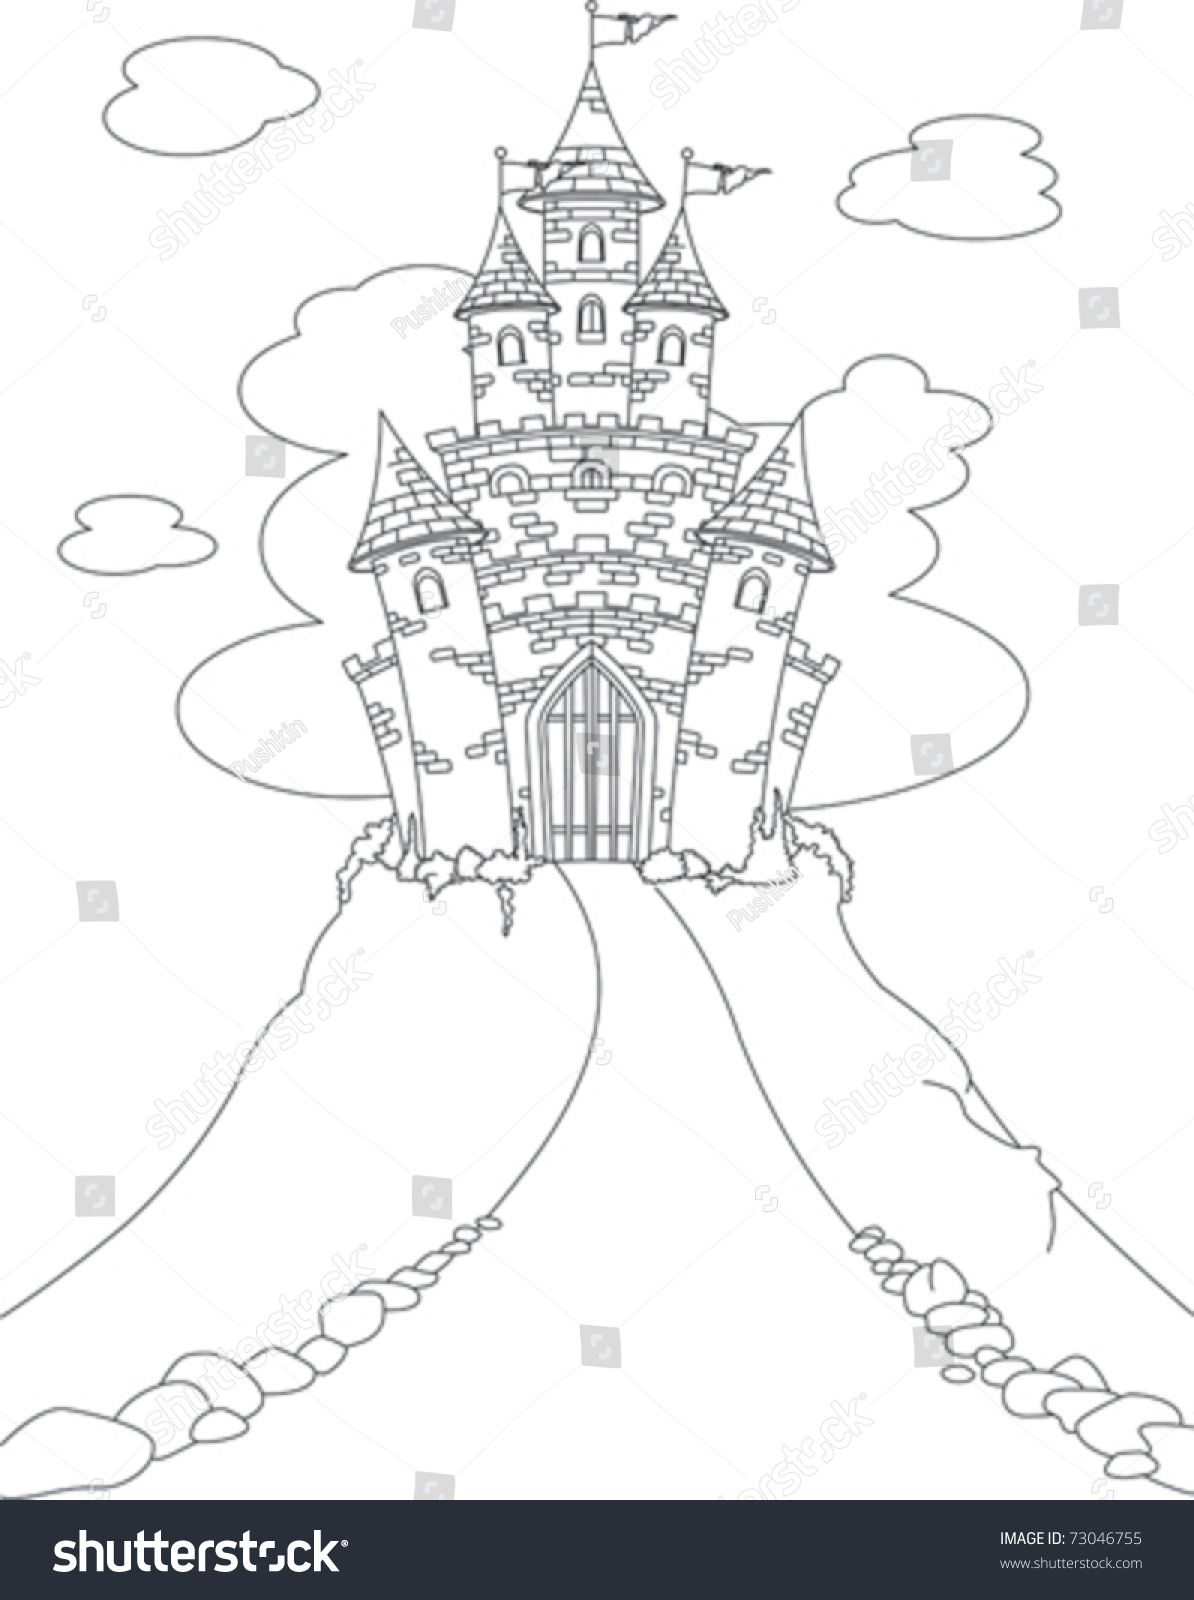 Coloring Page With Magic Fairy Tale Princess Castle Stock Vector Illustration 73046755 ...